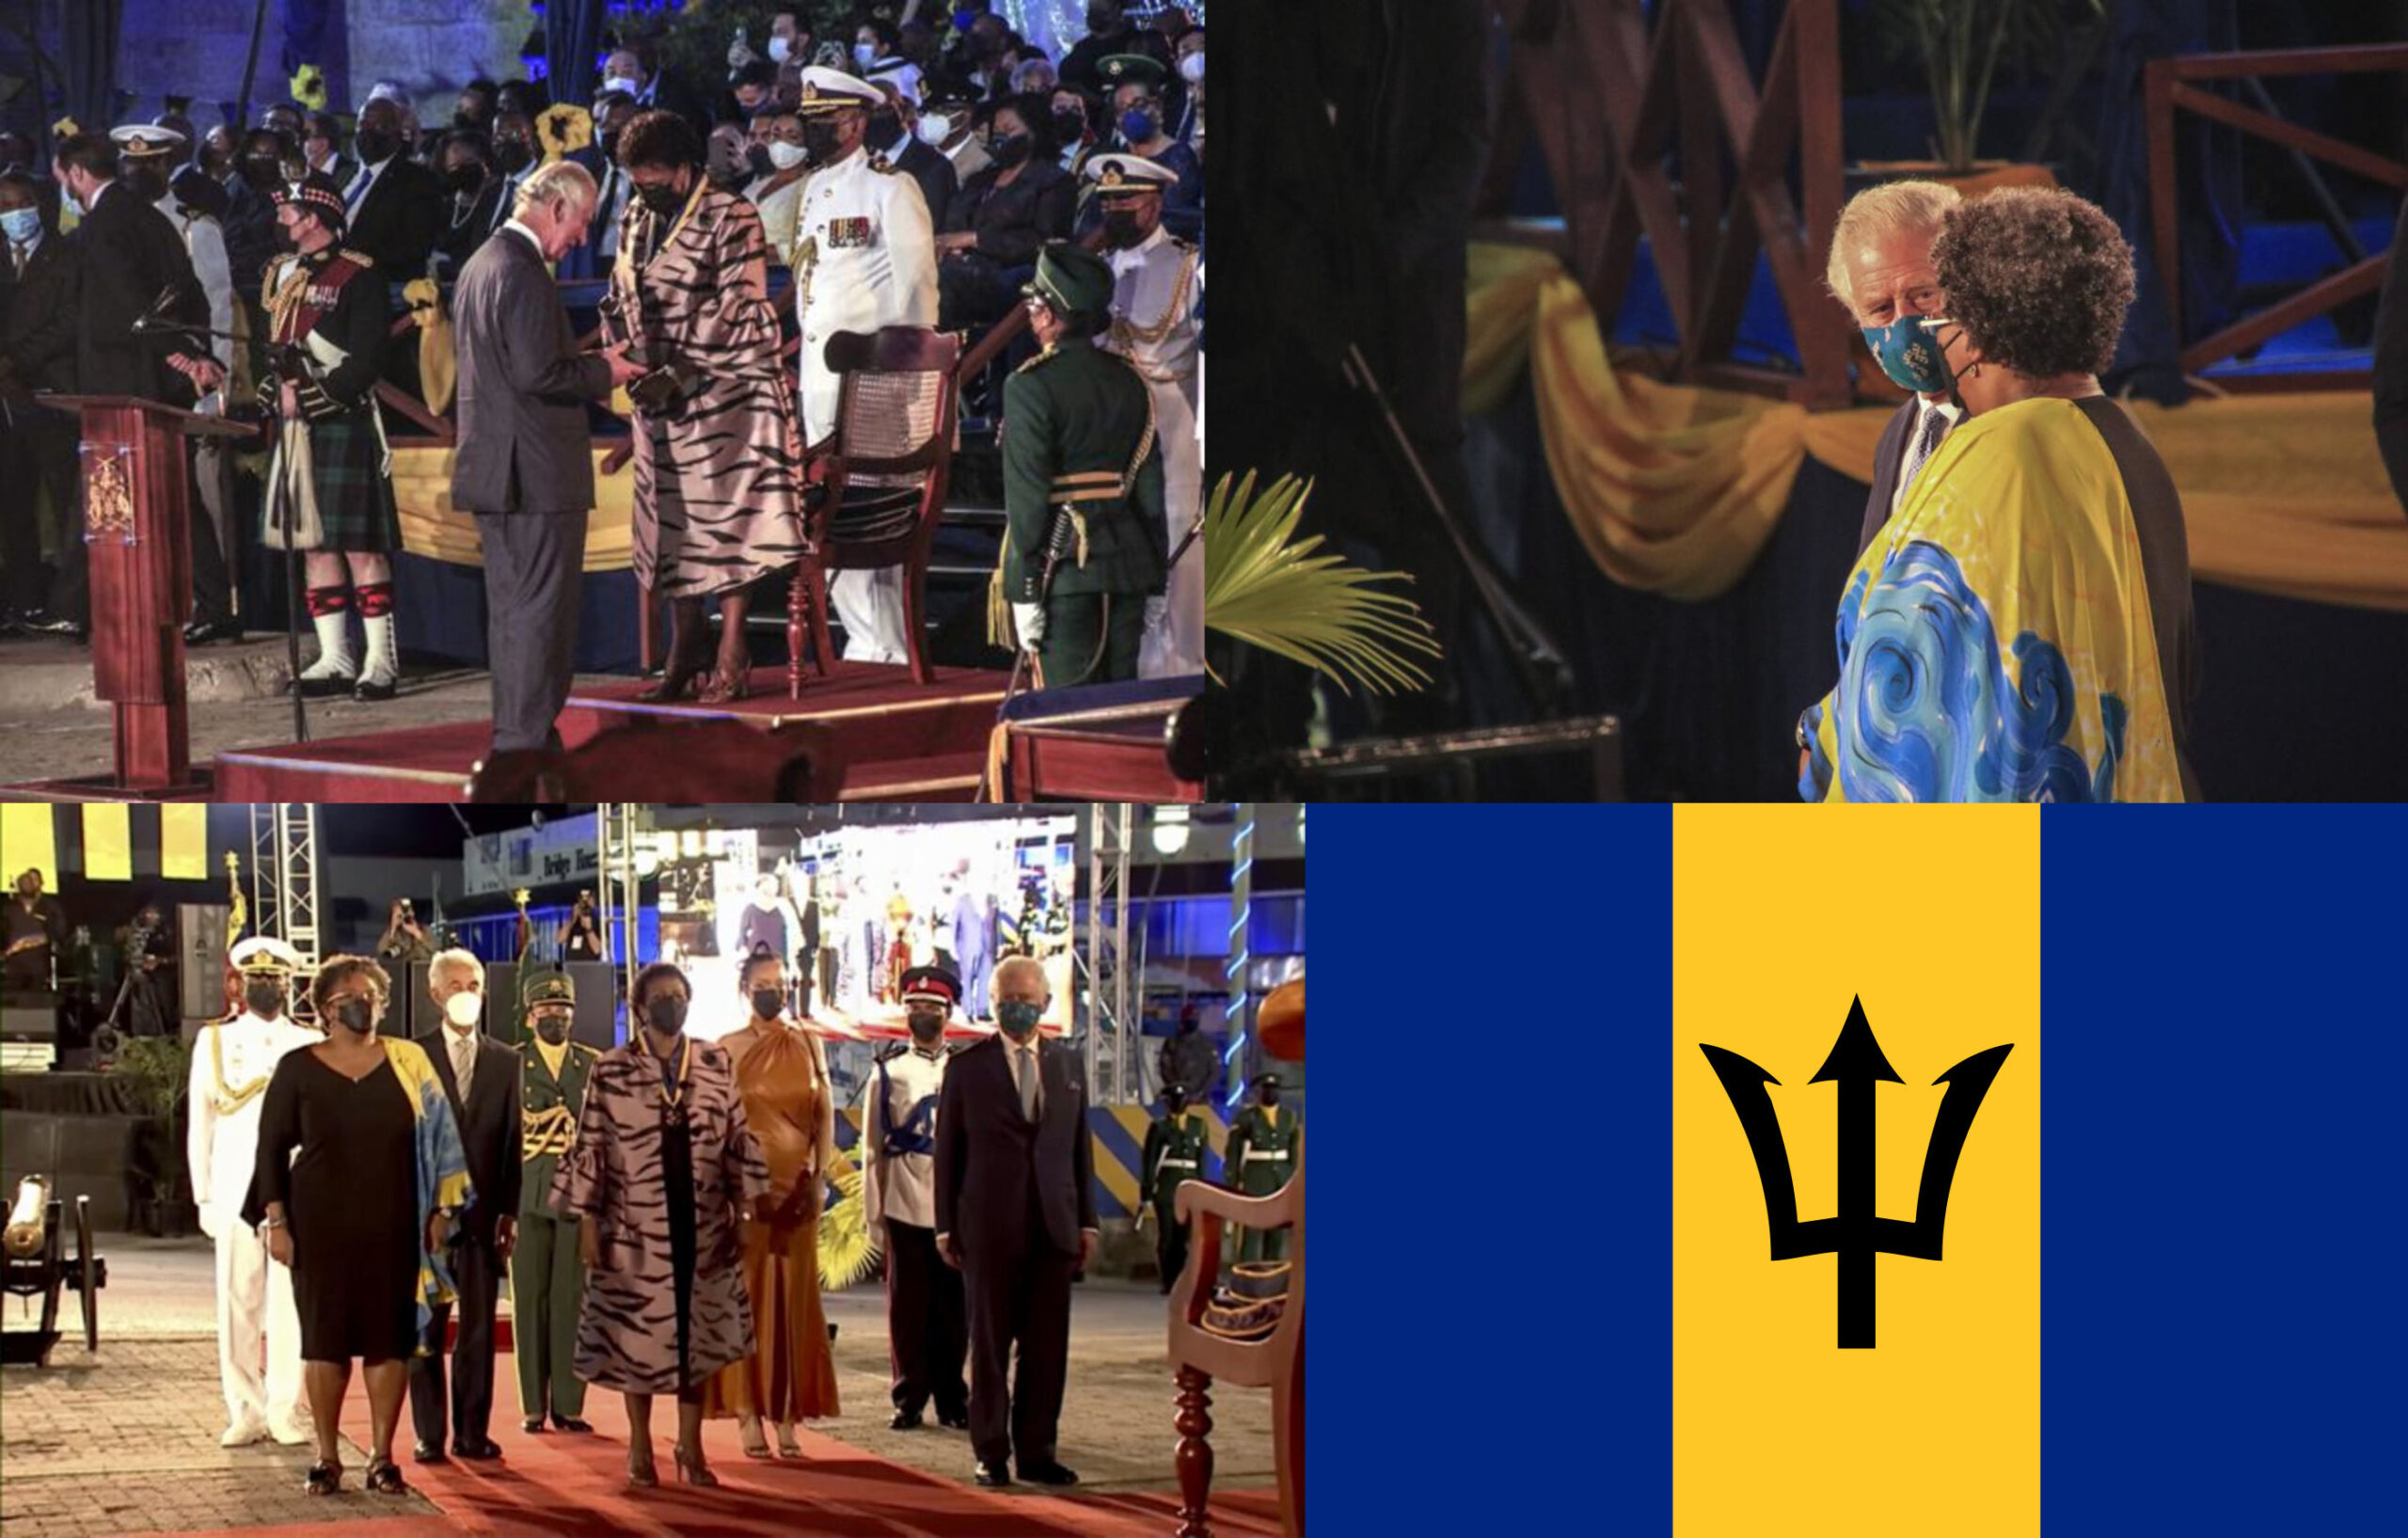 Barbados Bids Farewell To British Monarchy, Becomes Independent Republic